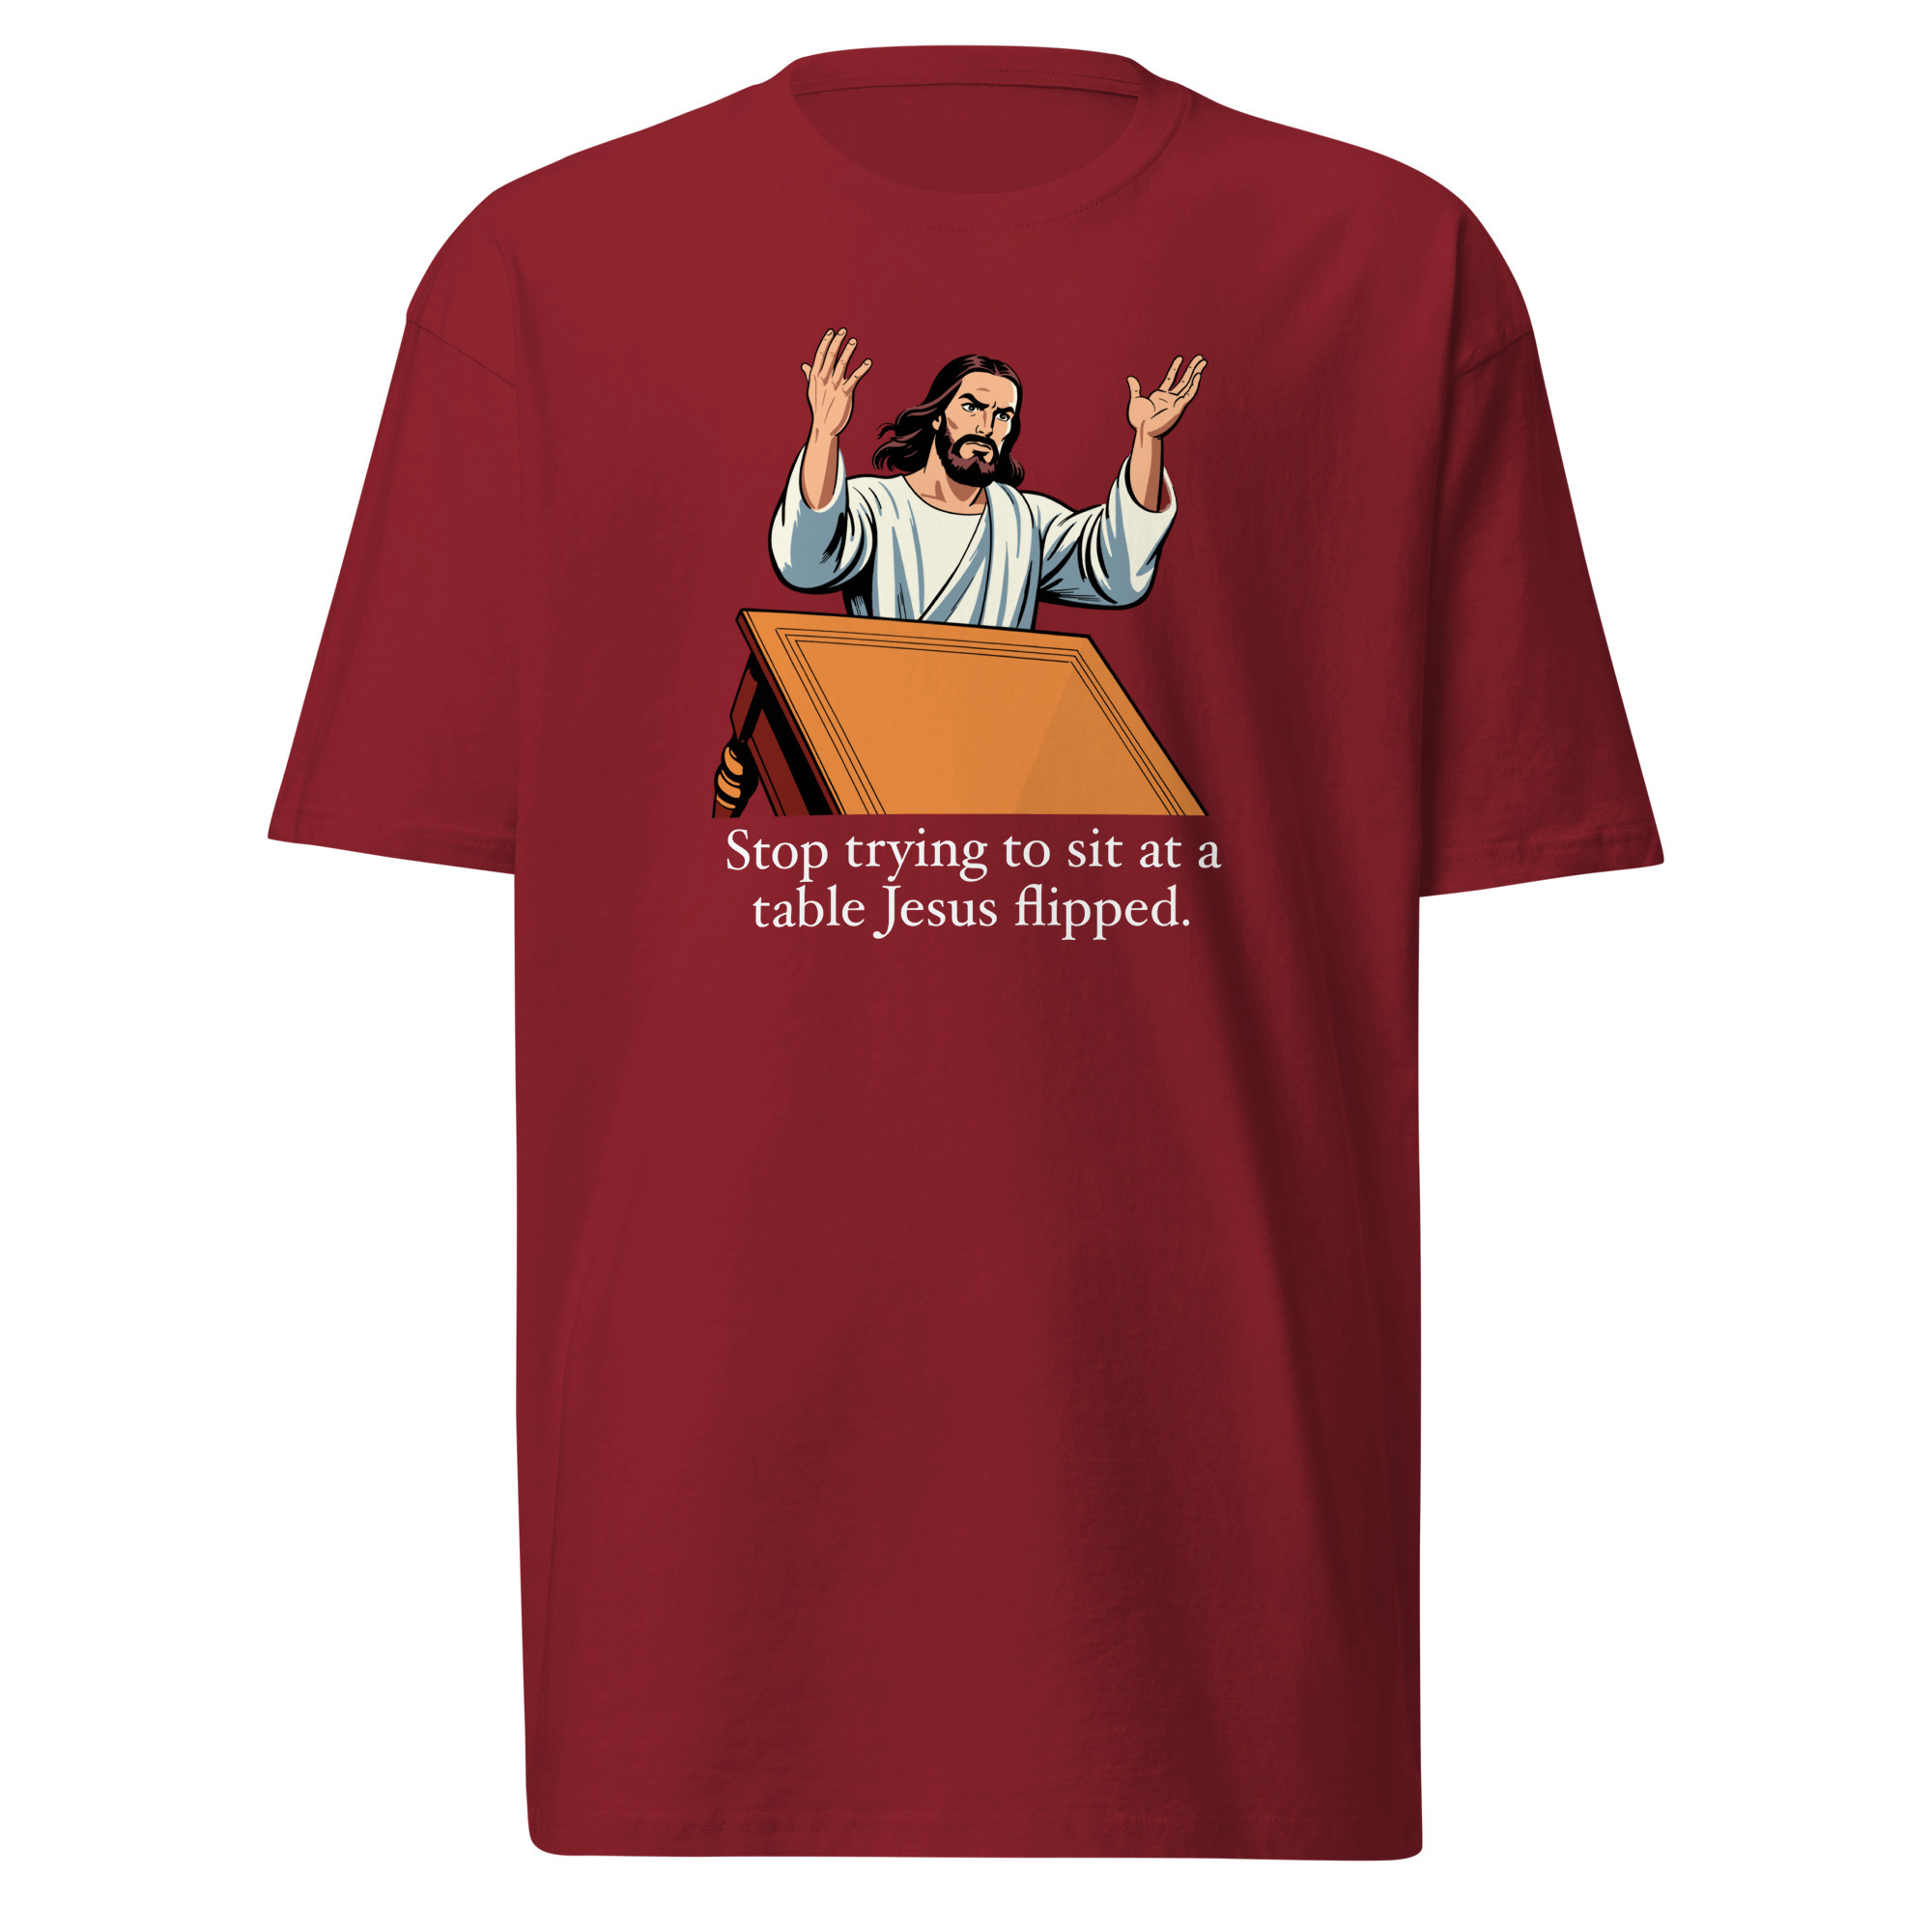 Stop trying to sit at a table Jesus flipped T-Shirt - Brick Red / L